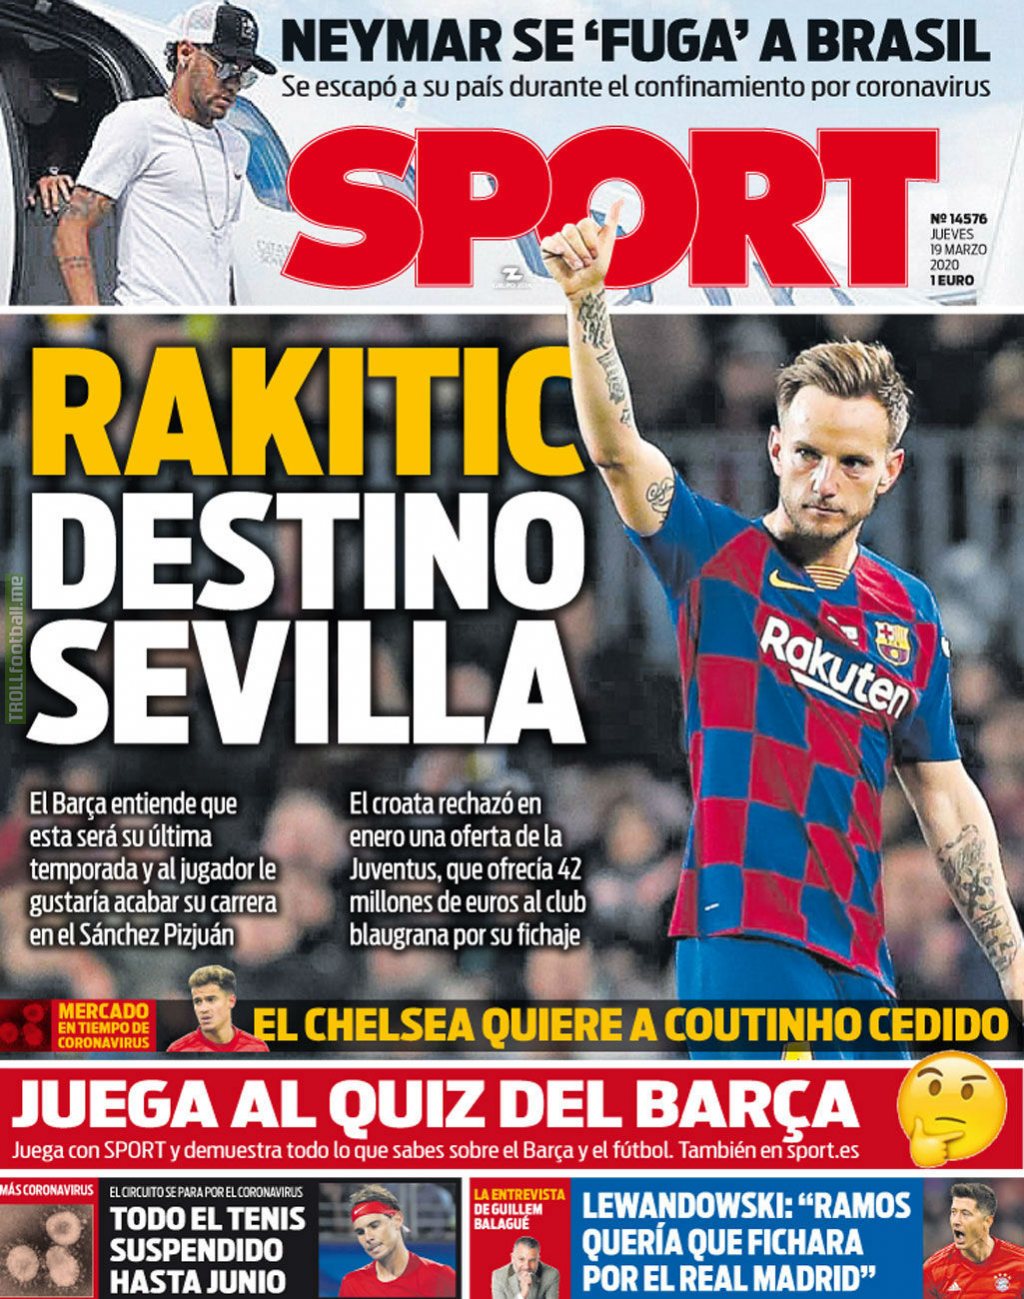 [SPORT] Ivan Rakitić heading for Barcelona exit! The club understands that this will be his last season and the player would like to end his career at Sevilla.